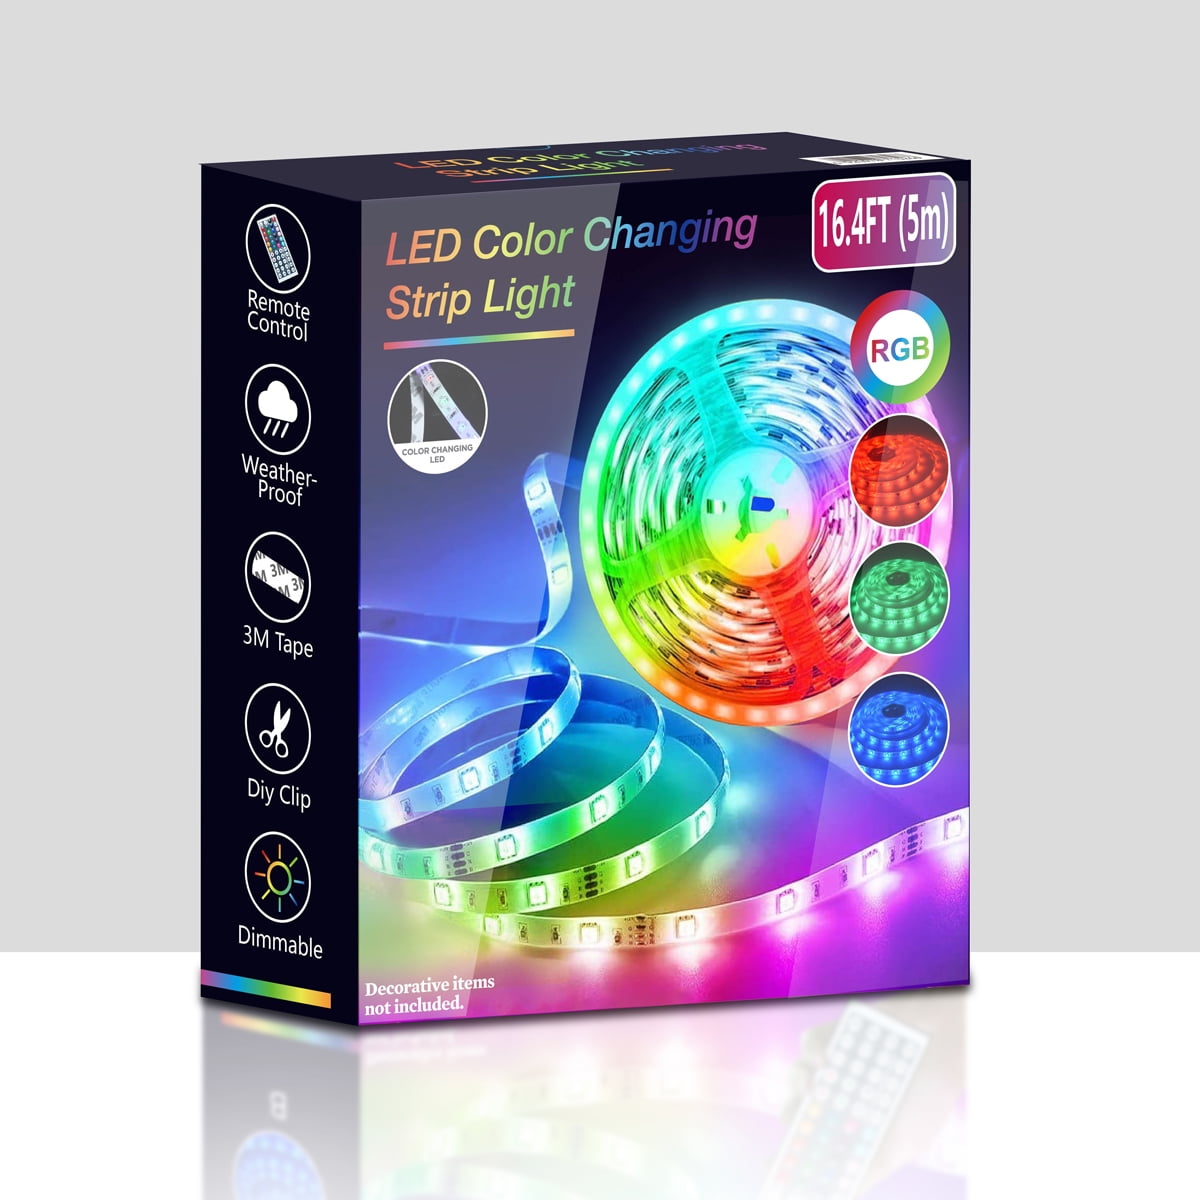 Details about   USB LED Light Bulb RGBW Color Changing with Remote Control for Camping Hiking 